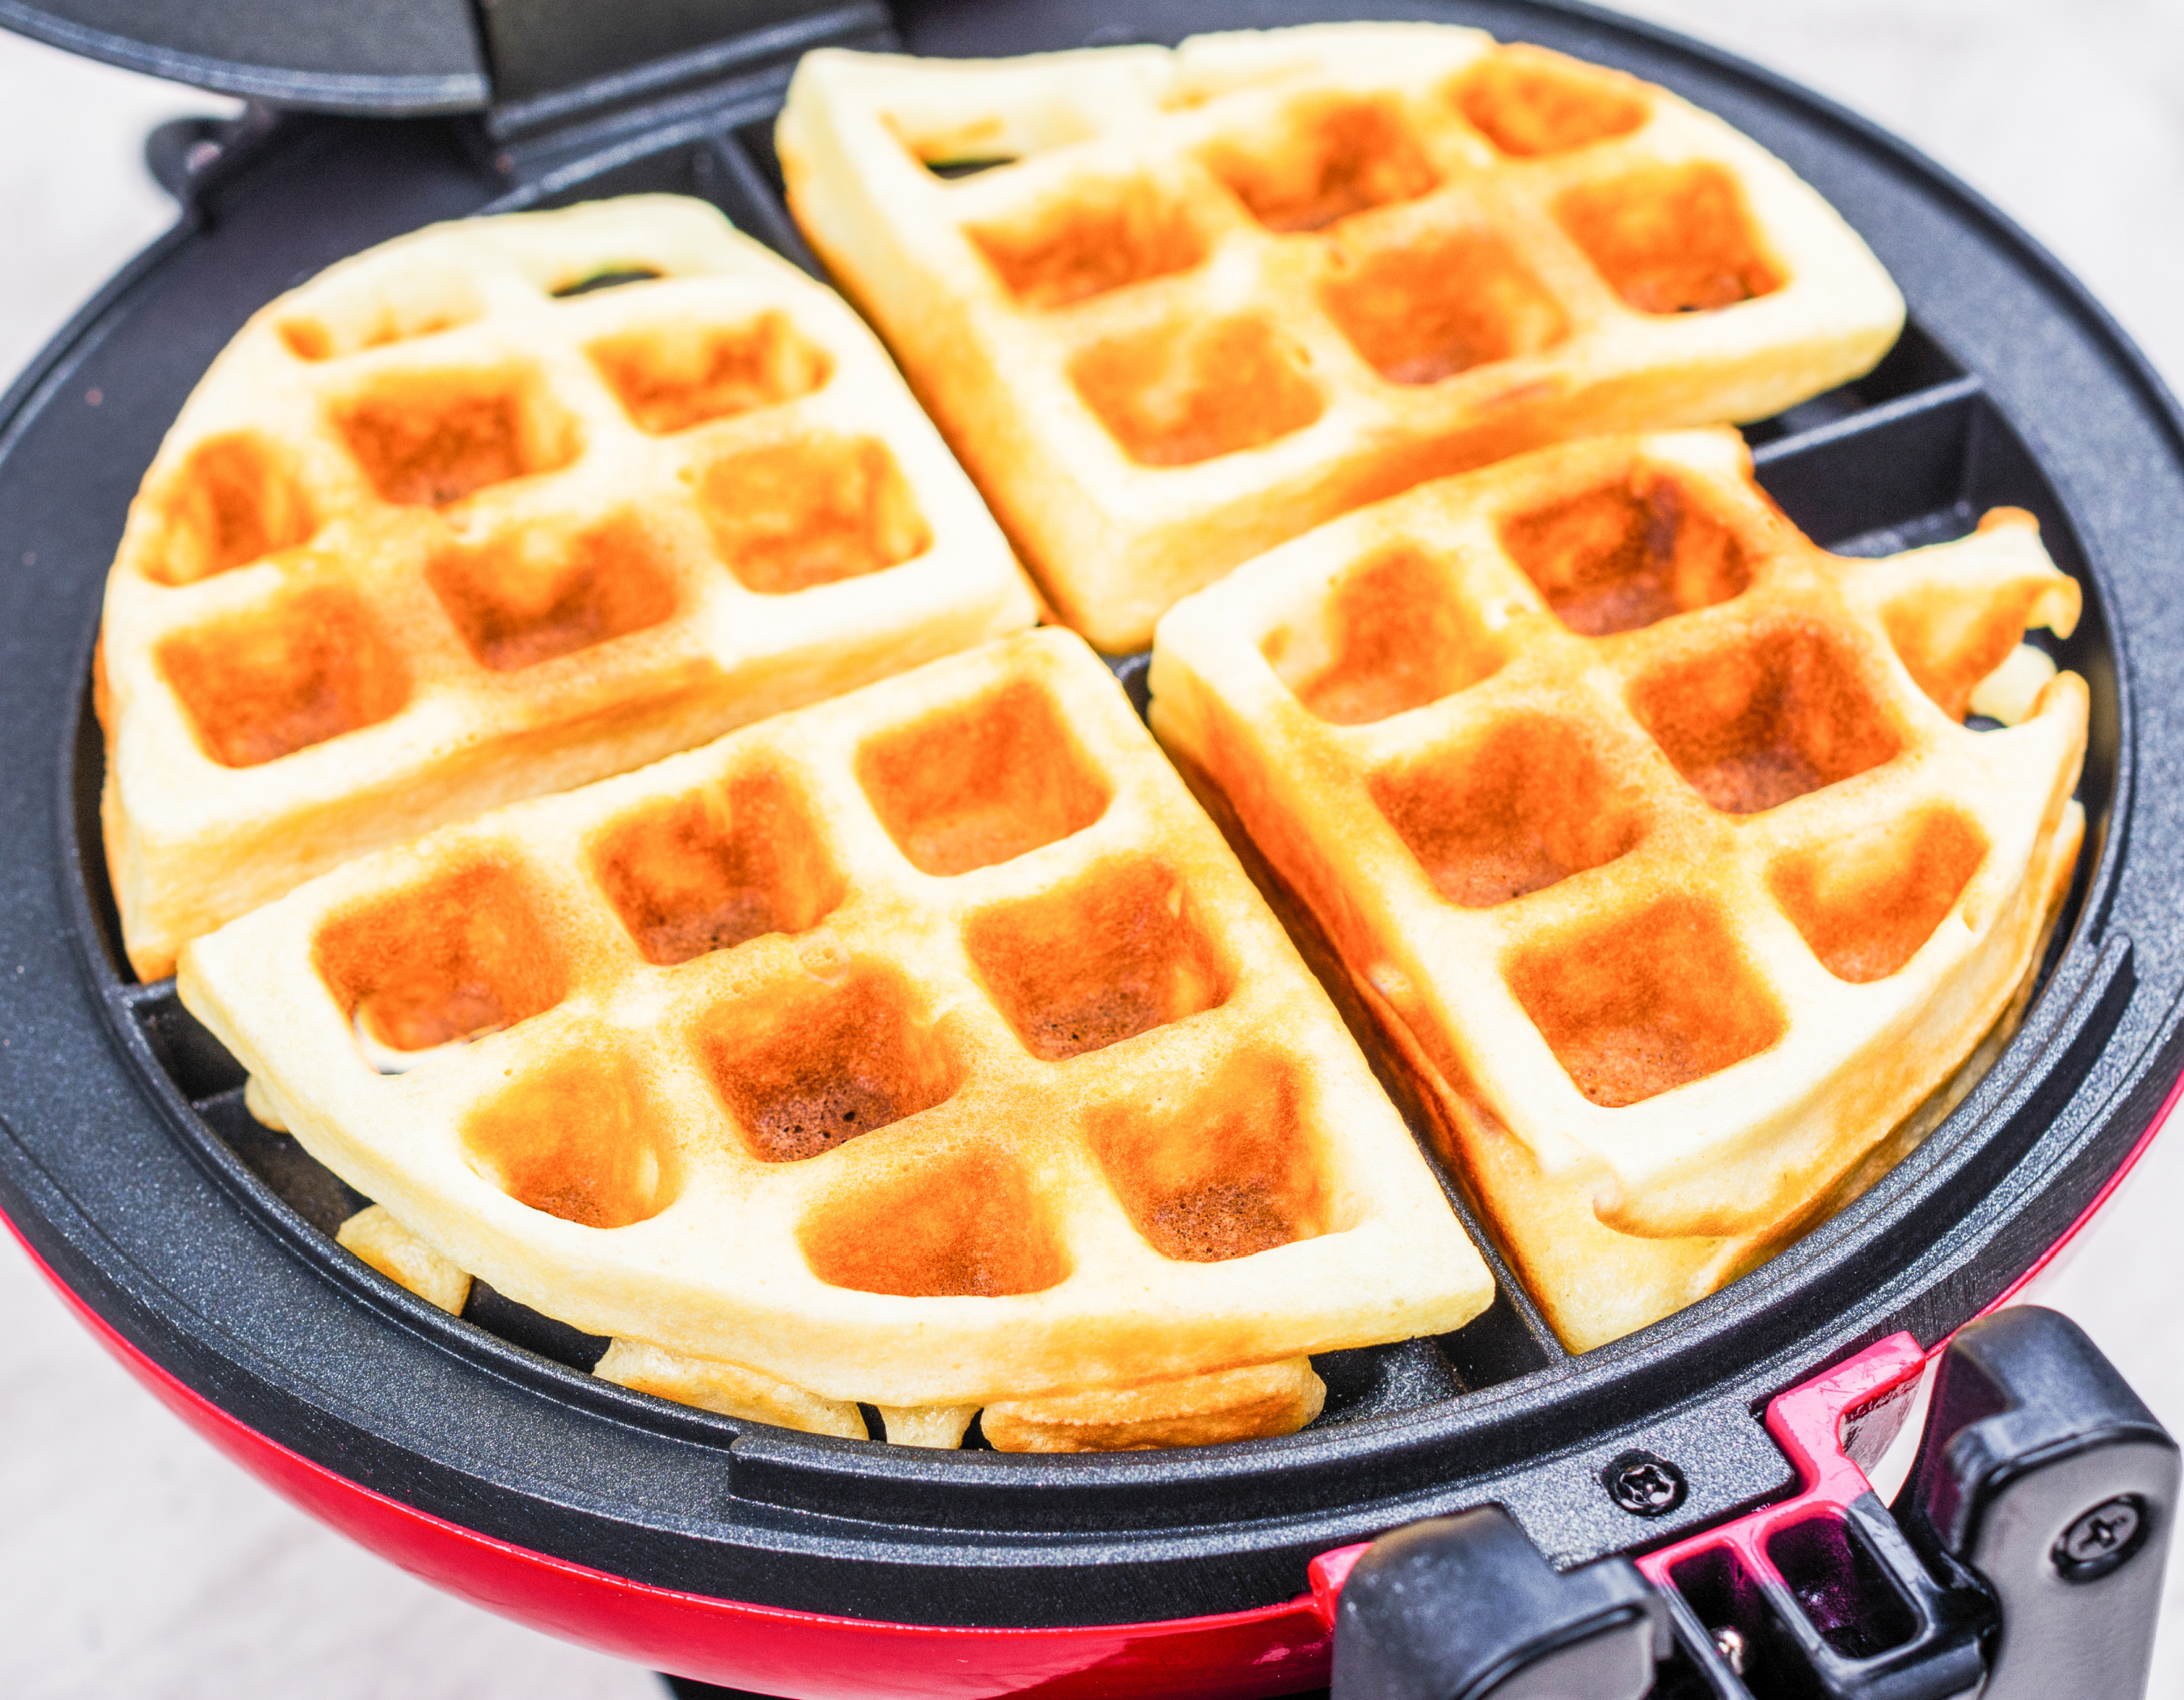 keto waffles made in red waffle iron